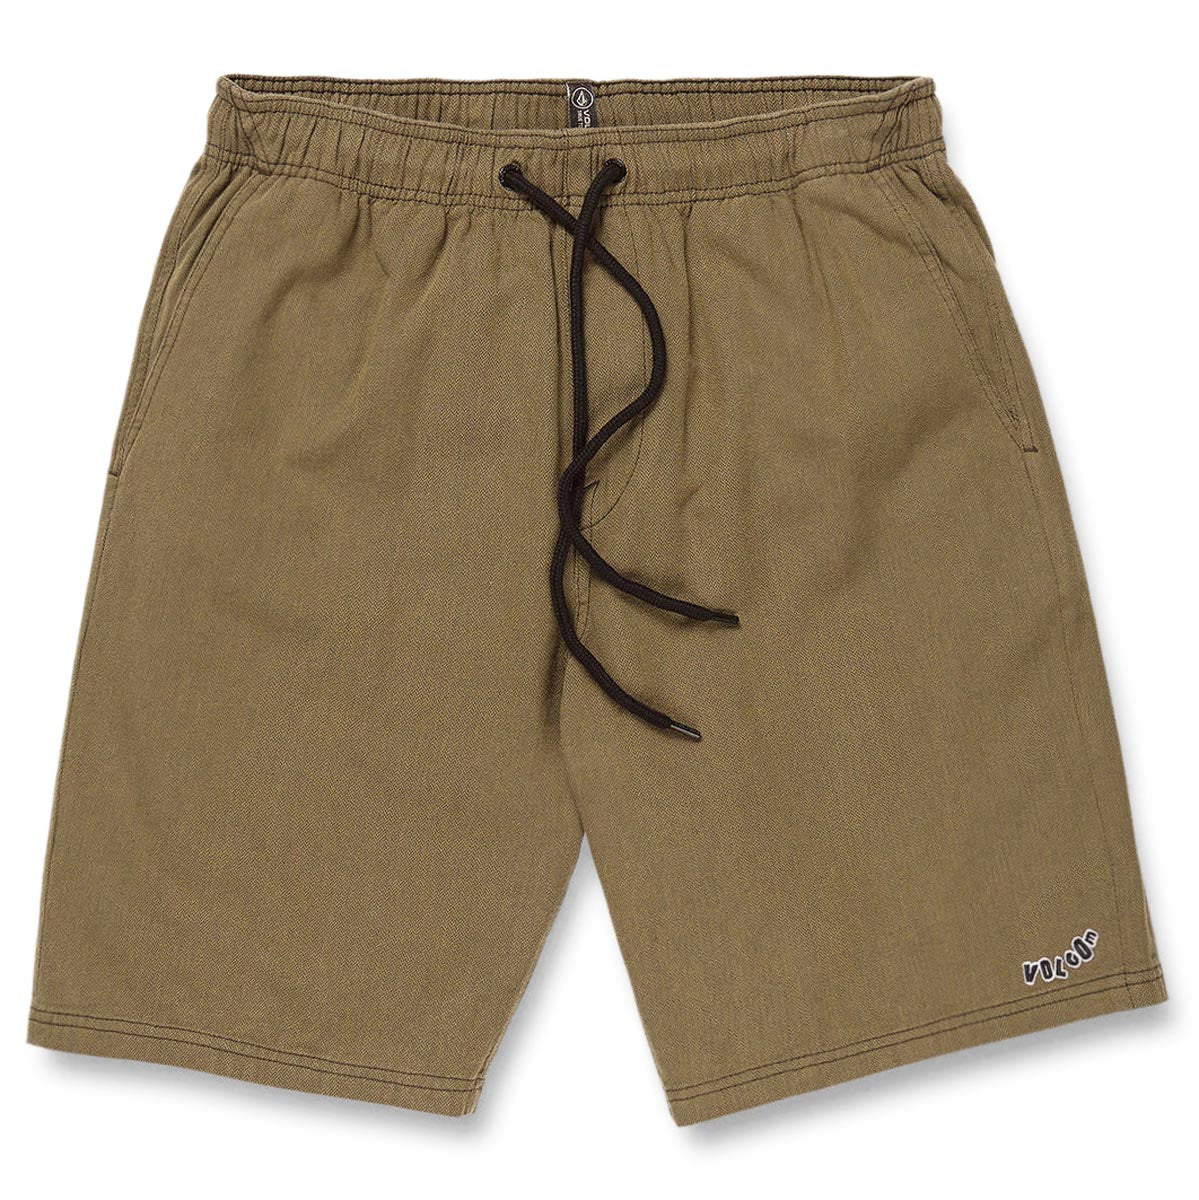 Volcom Outer Spaced Shorts - Old Mill image 1